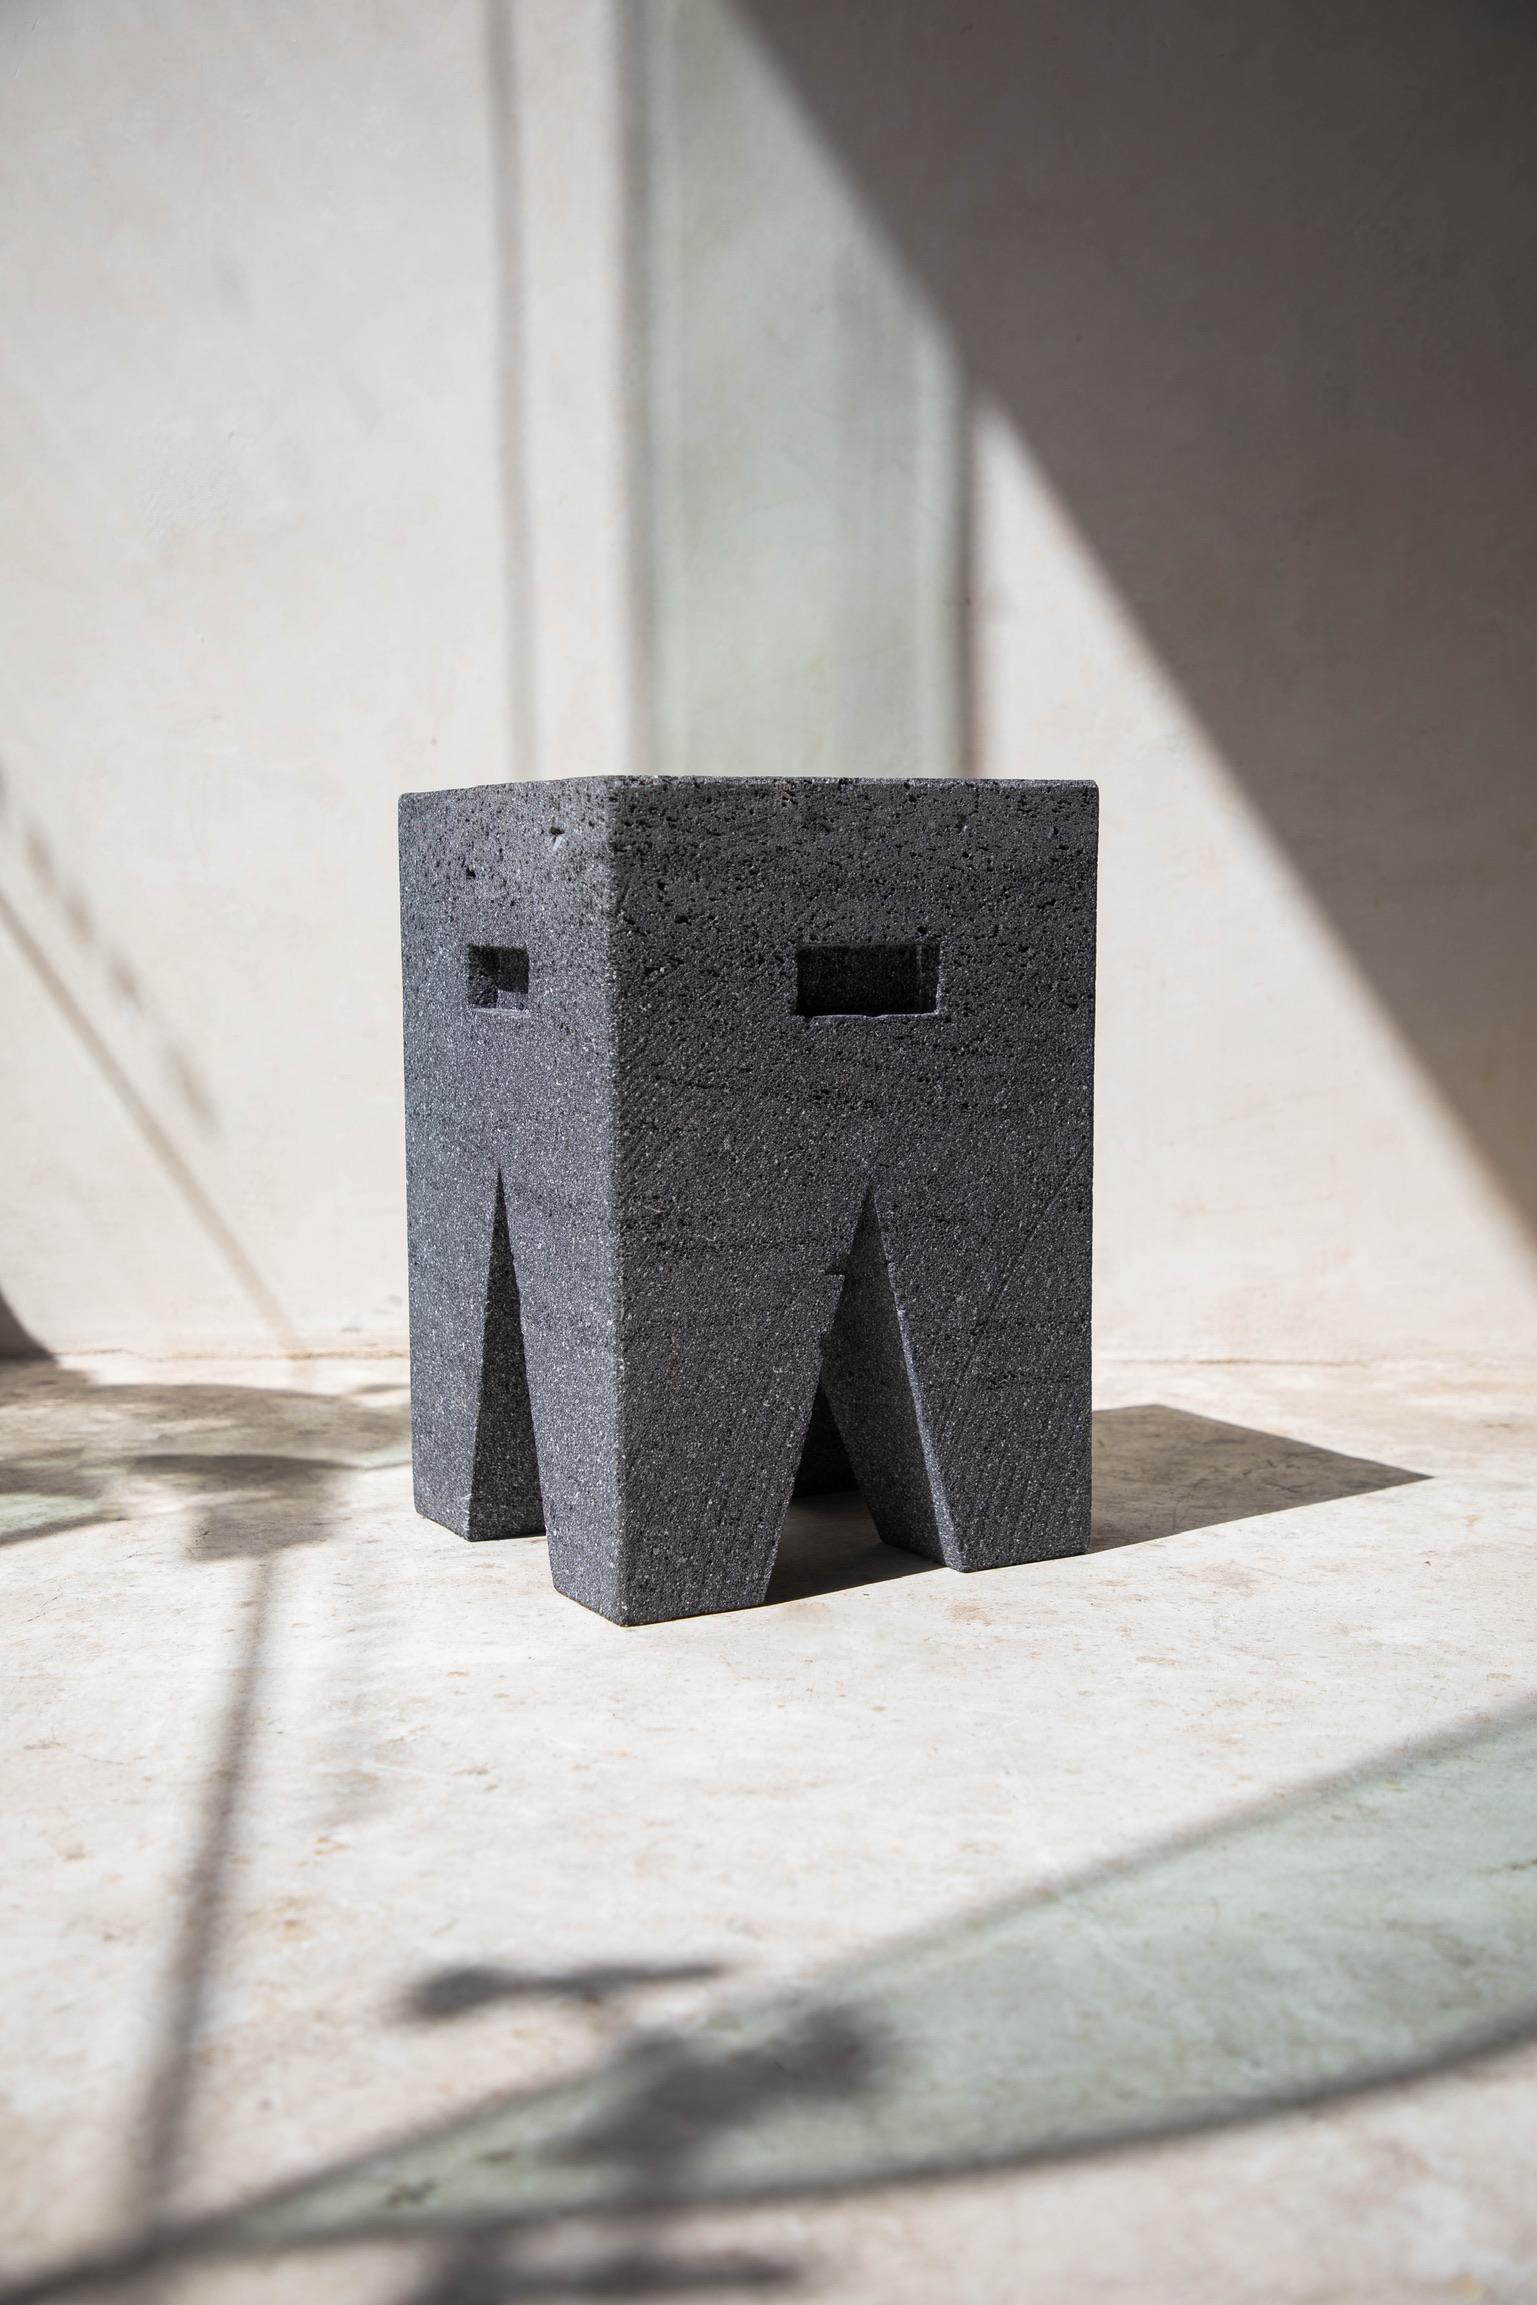 Stone totem 14 by Daniel Orozco.
Material: volcanic rock.
Dimensions: D 35 x H 45 cm.

Volvanic rock Totem.

Daniel Orozco Estudio.
We are an inclusive interior design estudio, who love to work with fabrics and natural textiles in makes our